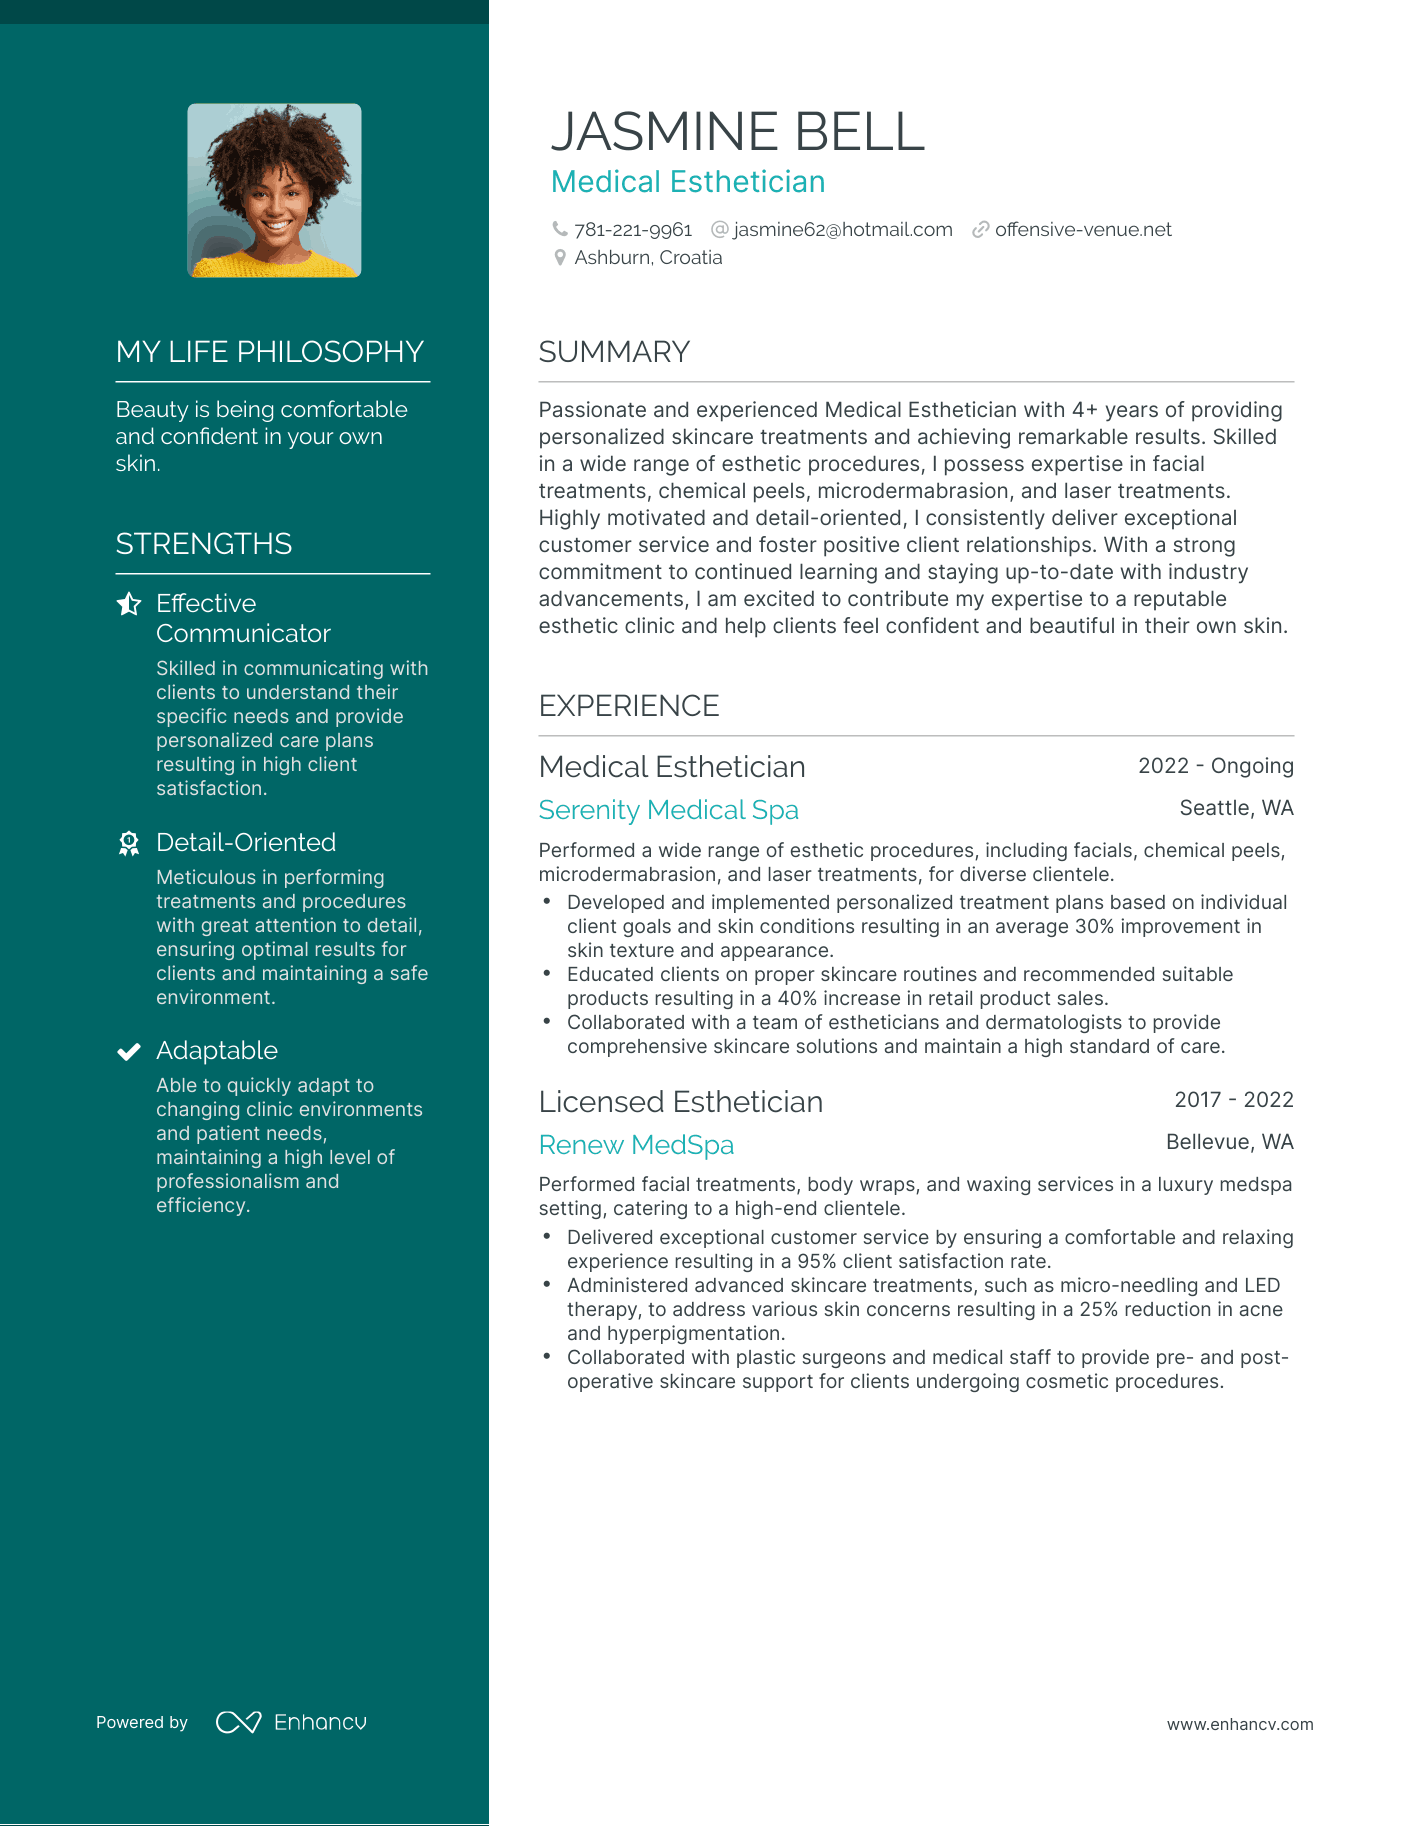 3 Medical Esthetician Resume Examples And How To Guide For 2023